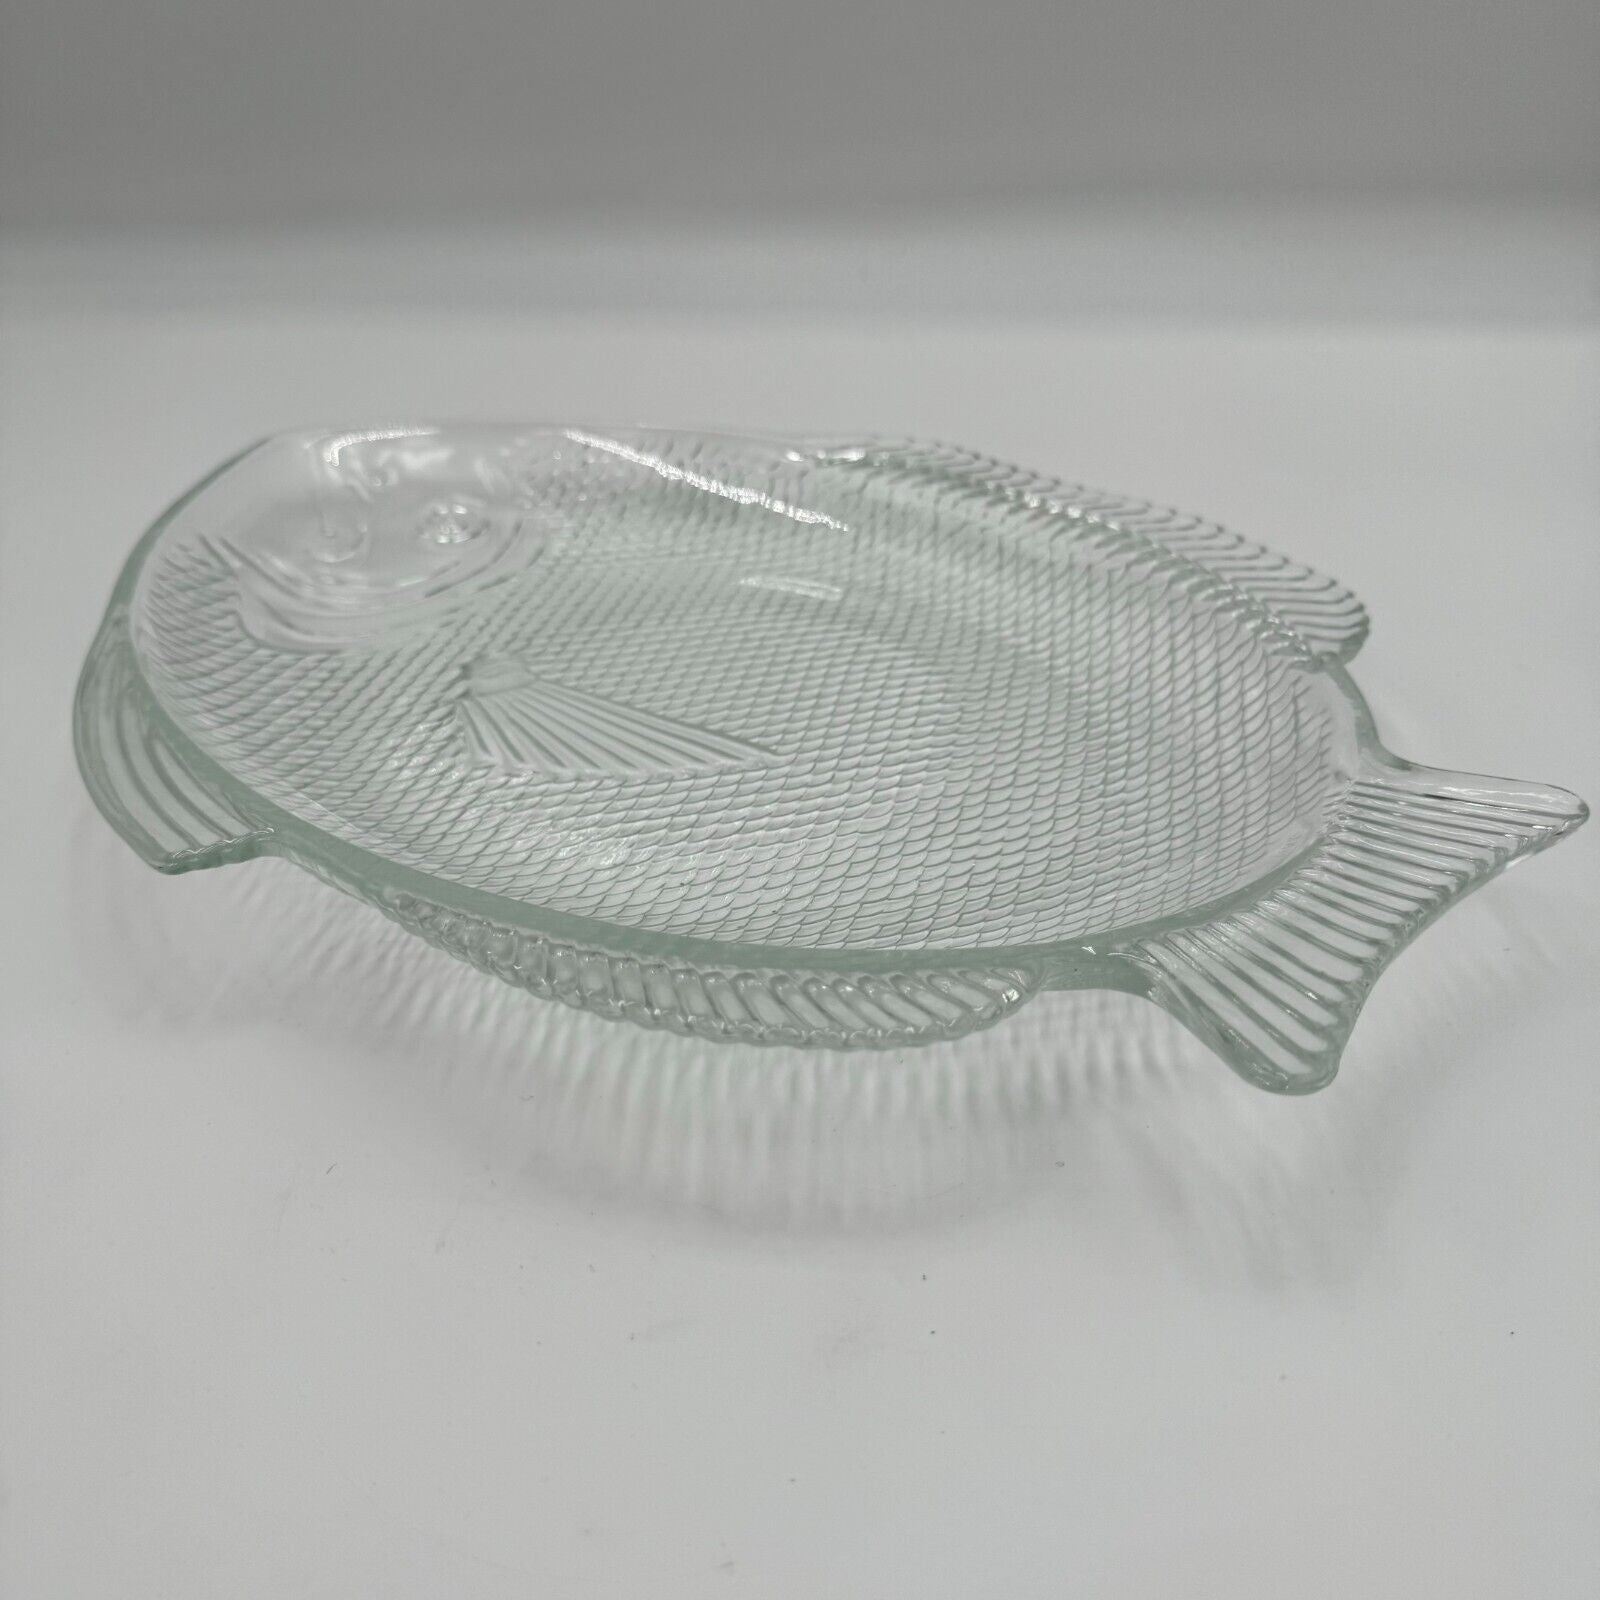 Vintage Clear Glass Ovenproof Fish Shaped Plate, 11" x 8"